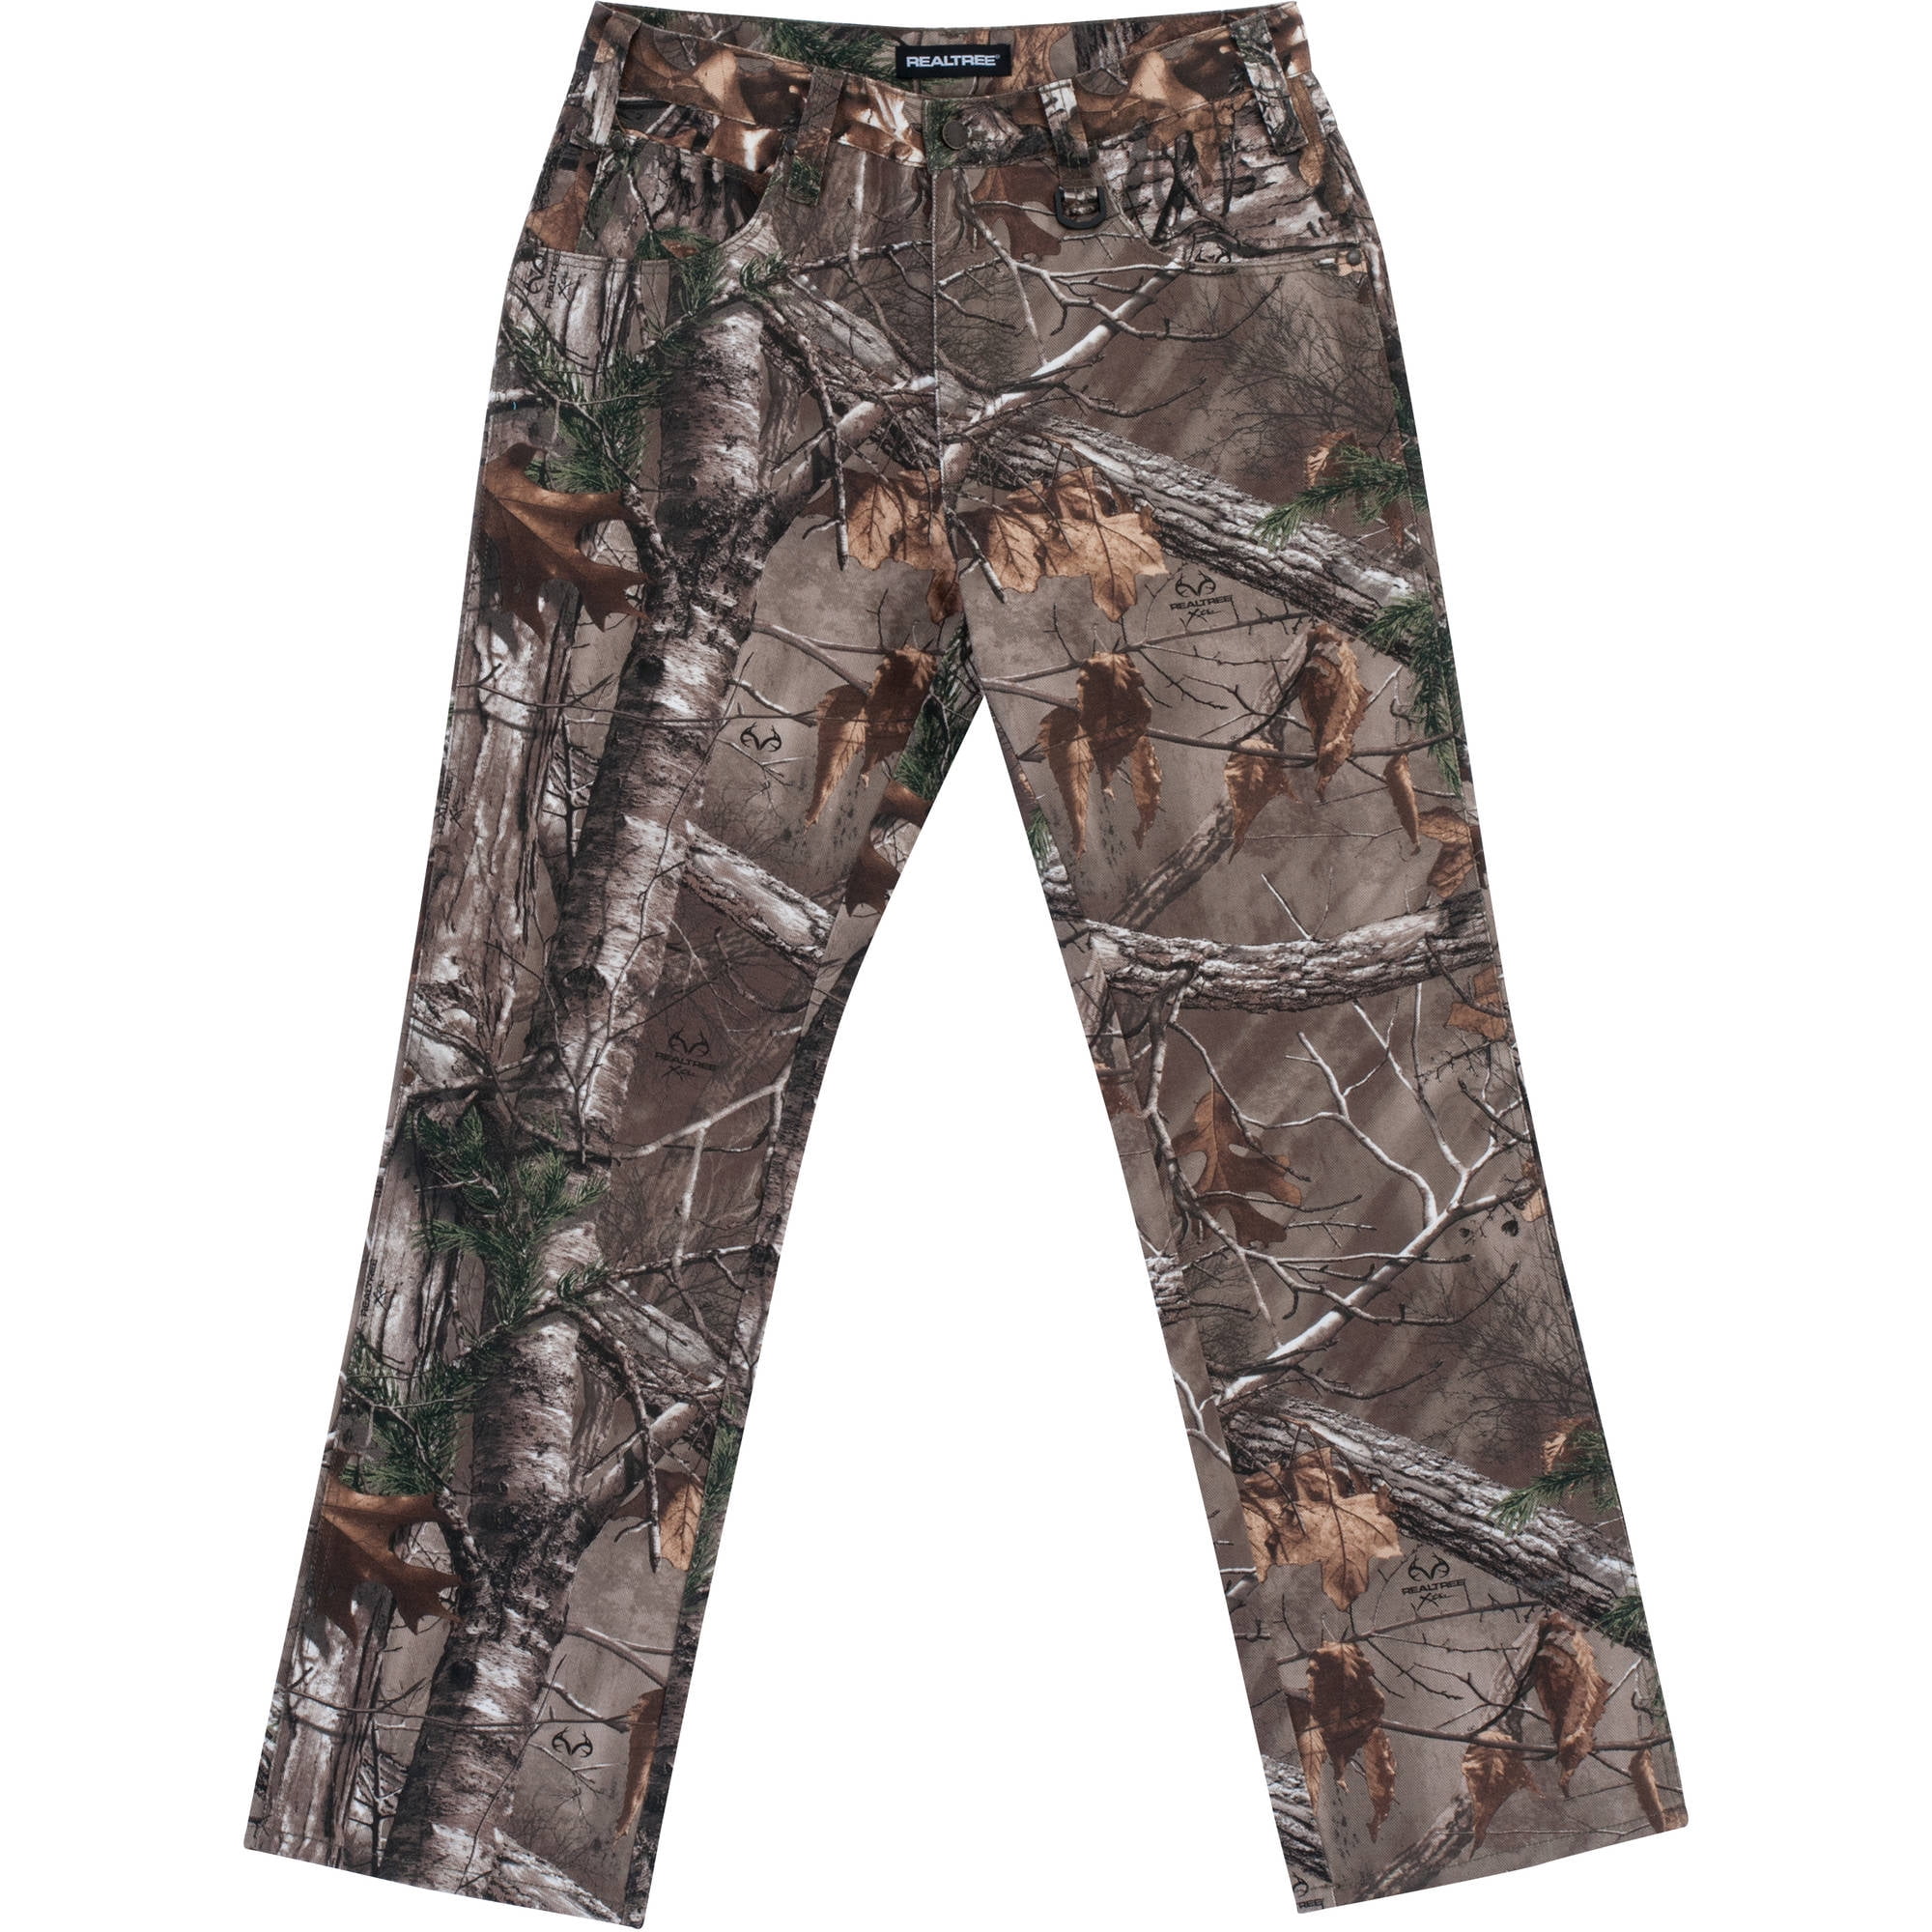 Men's 5-Pocket Pants, Available in and Mossy Oak - Walmart.com ...